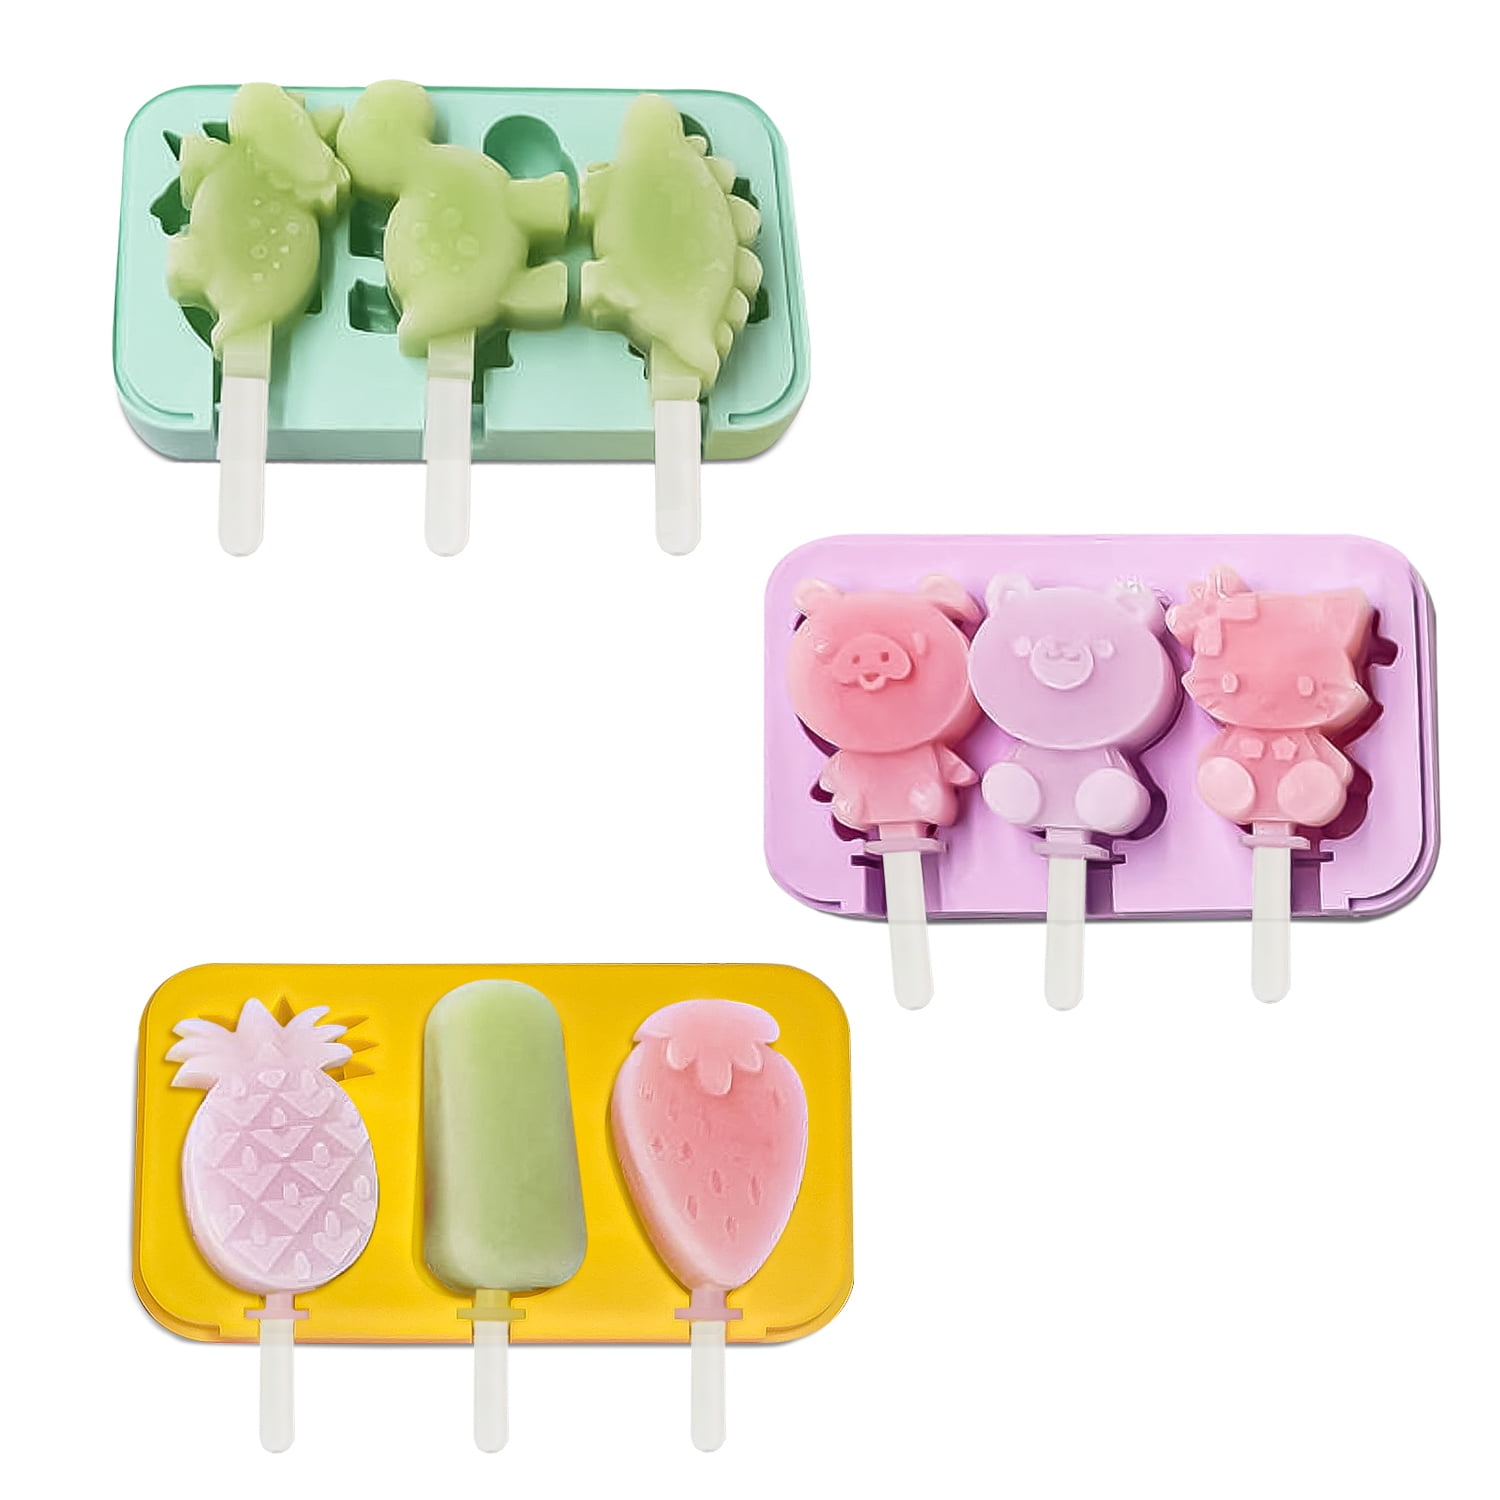 Adoric, A Home Store, Bedding, Kitchen Gadgets, Adoric Official Site -  Popsicle Molds- Silicone Popsicle Mold 6 Sphere Ice Pop Molds Reusable Easy